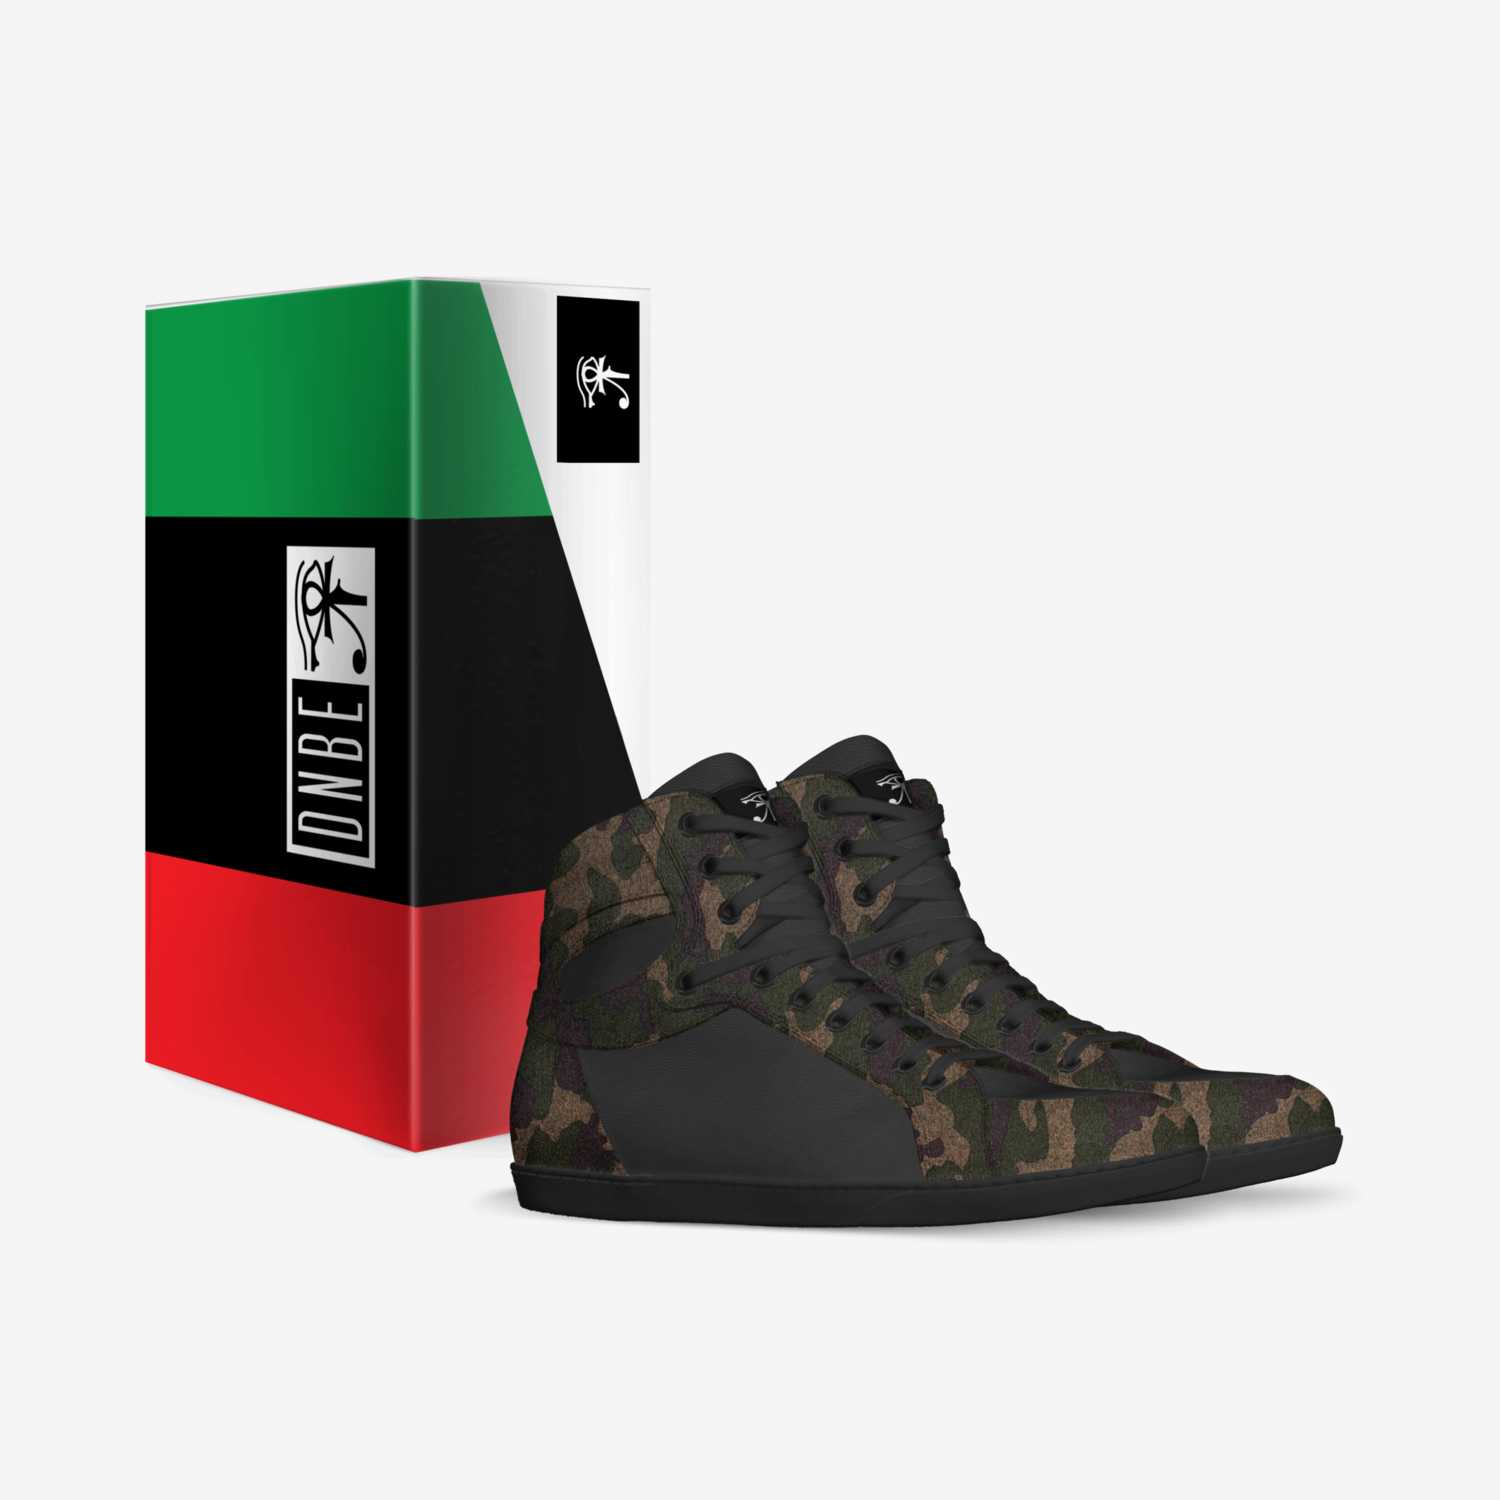 Jegna - Army custom made in Italy shoes by Dnbe Apparel | Box view